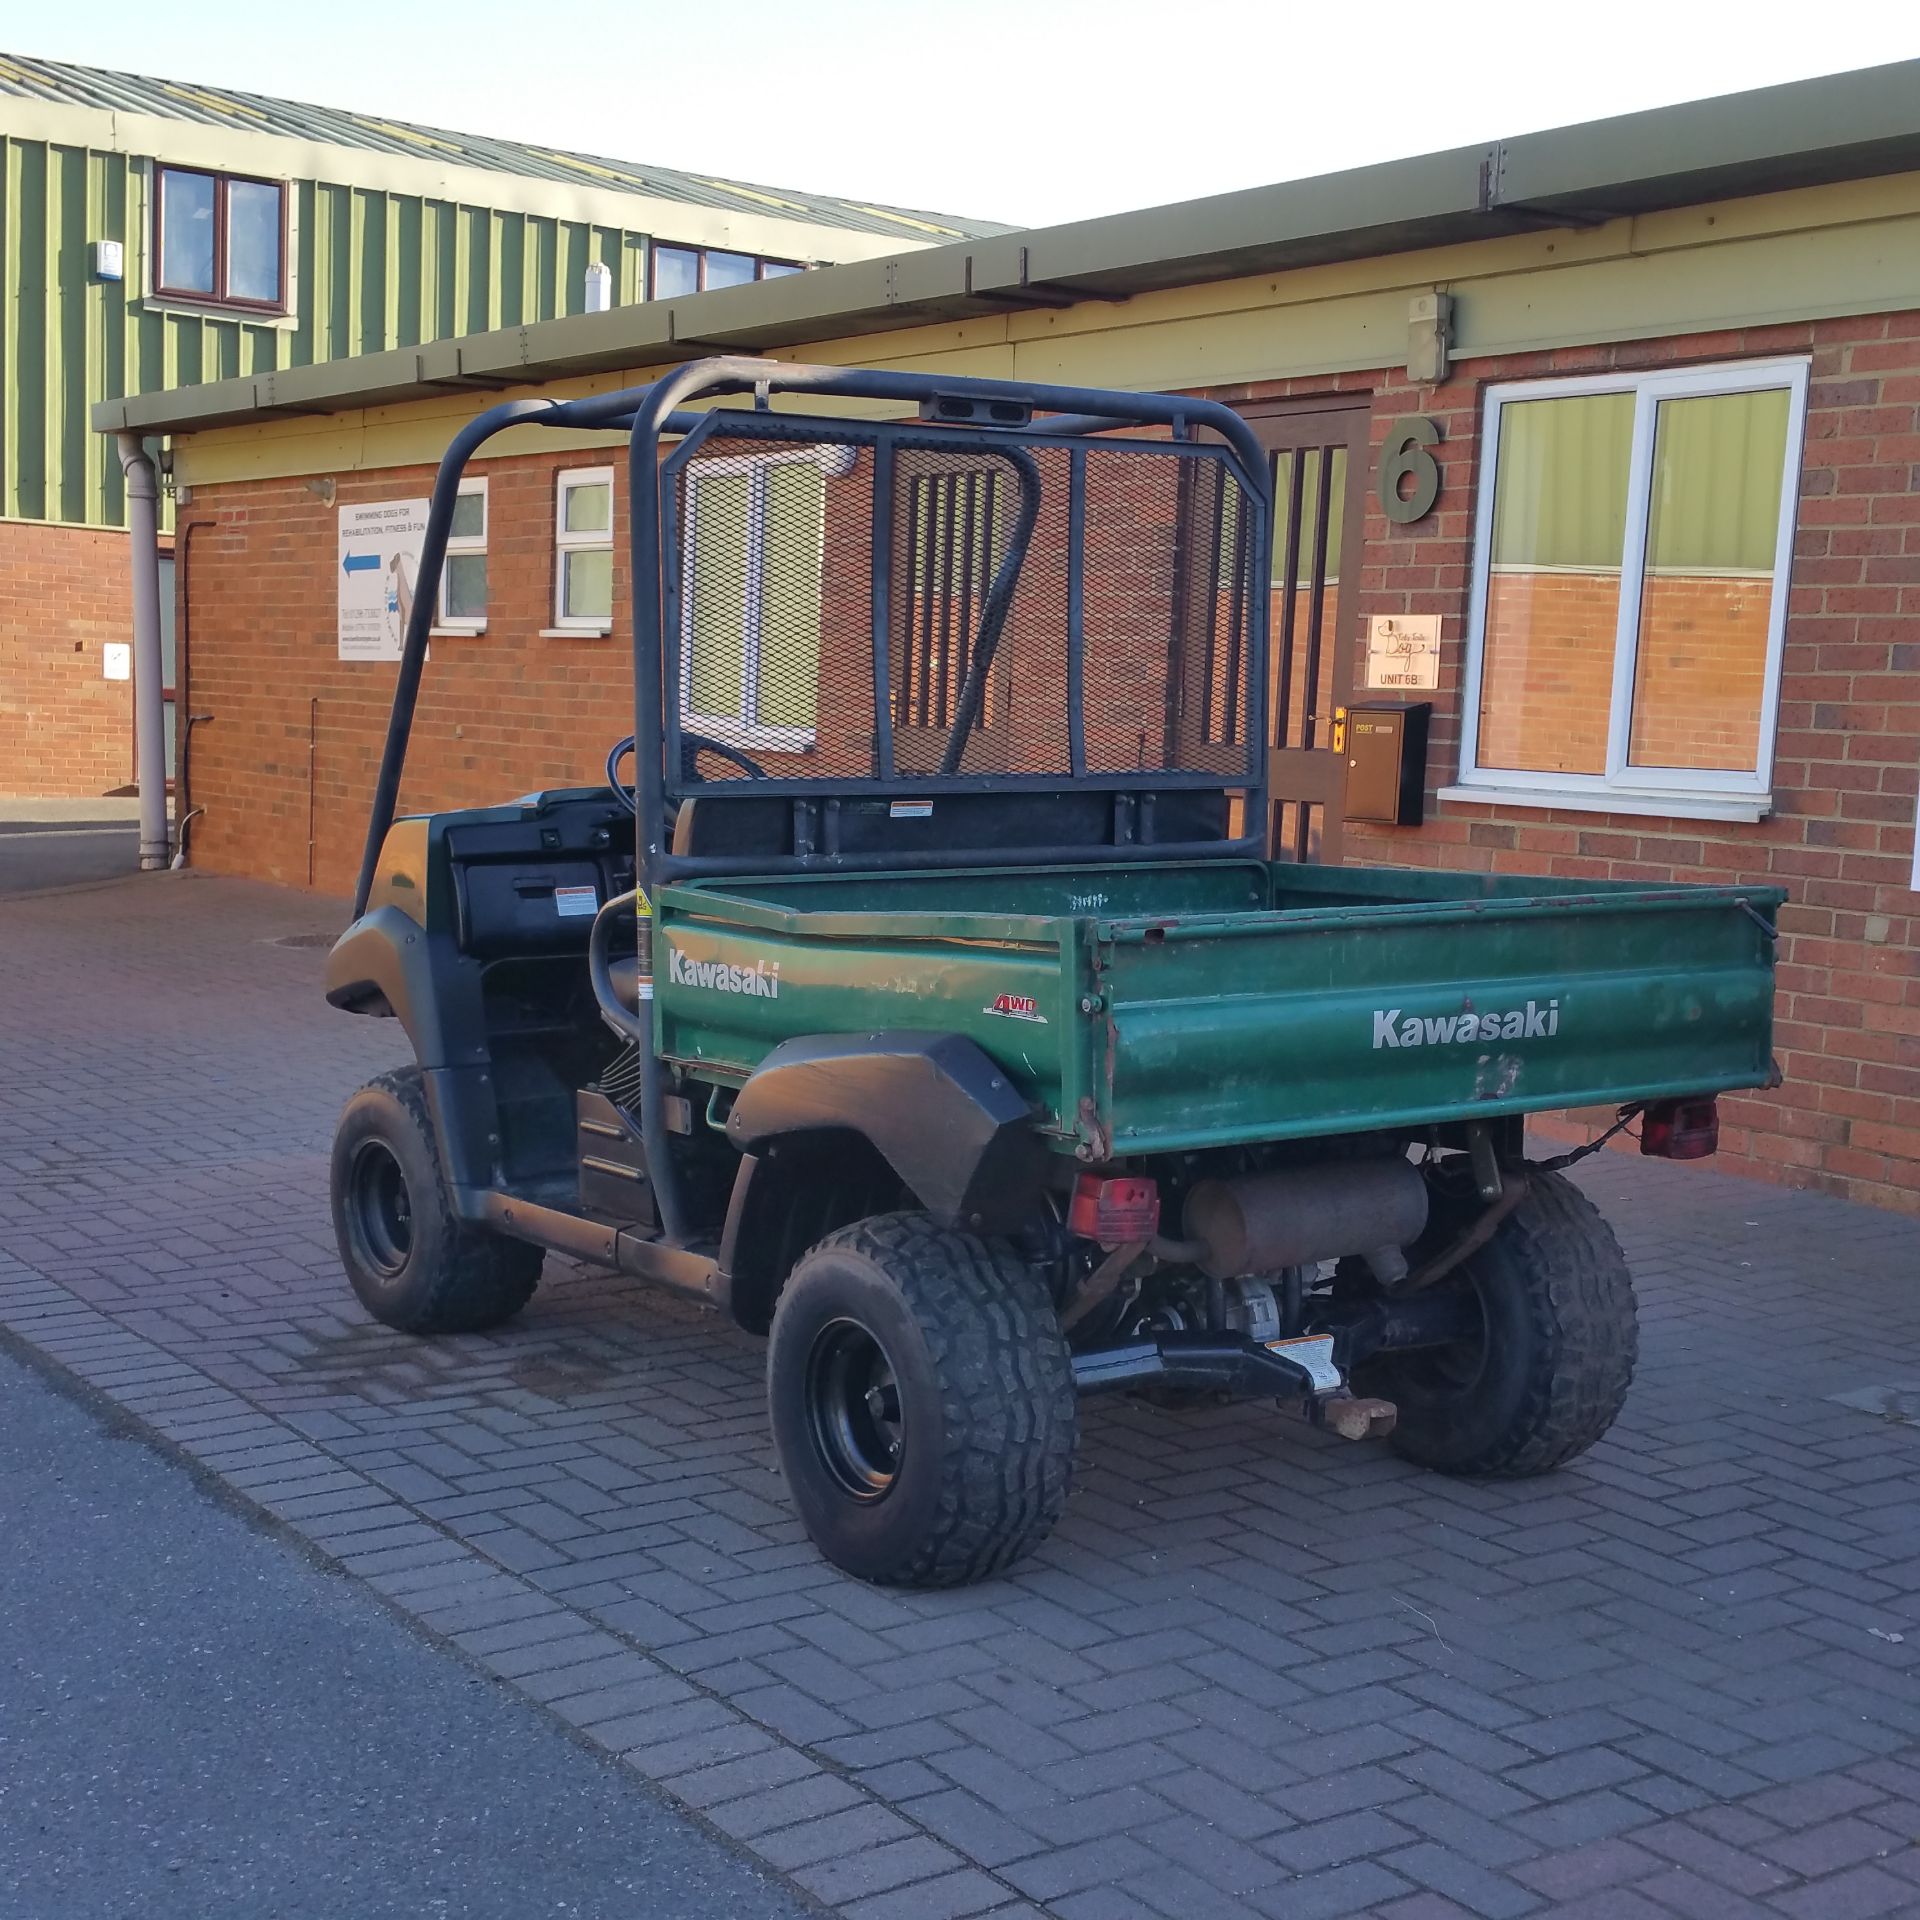 Kawasaki Mule 4010. Year 2009. Hours 1880. Electric tipping body. - Image 2 of 6